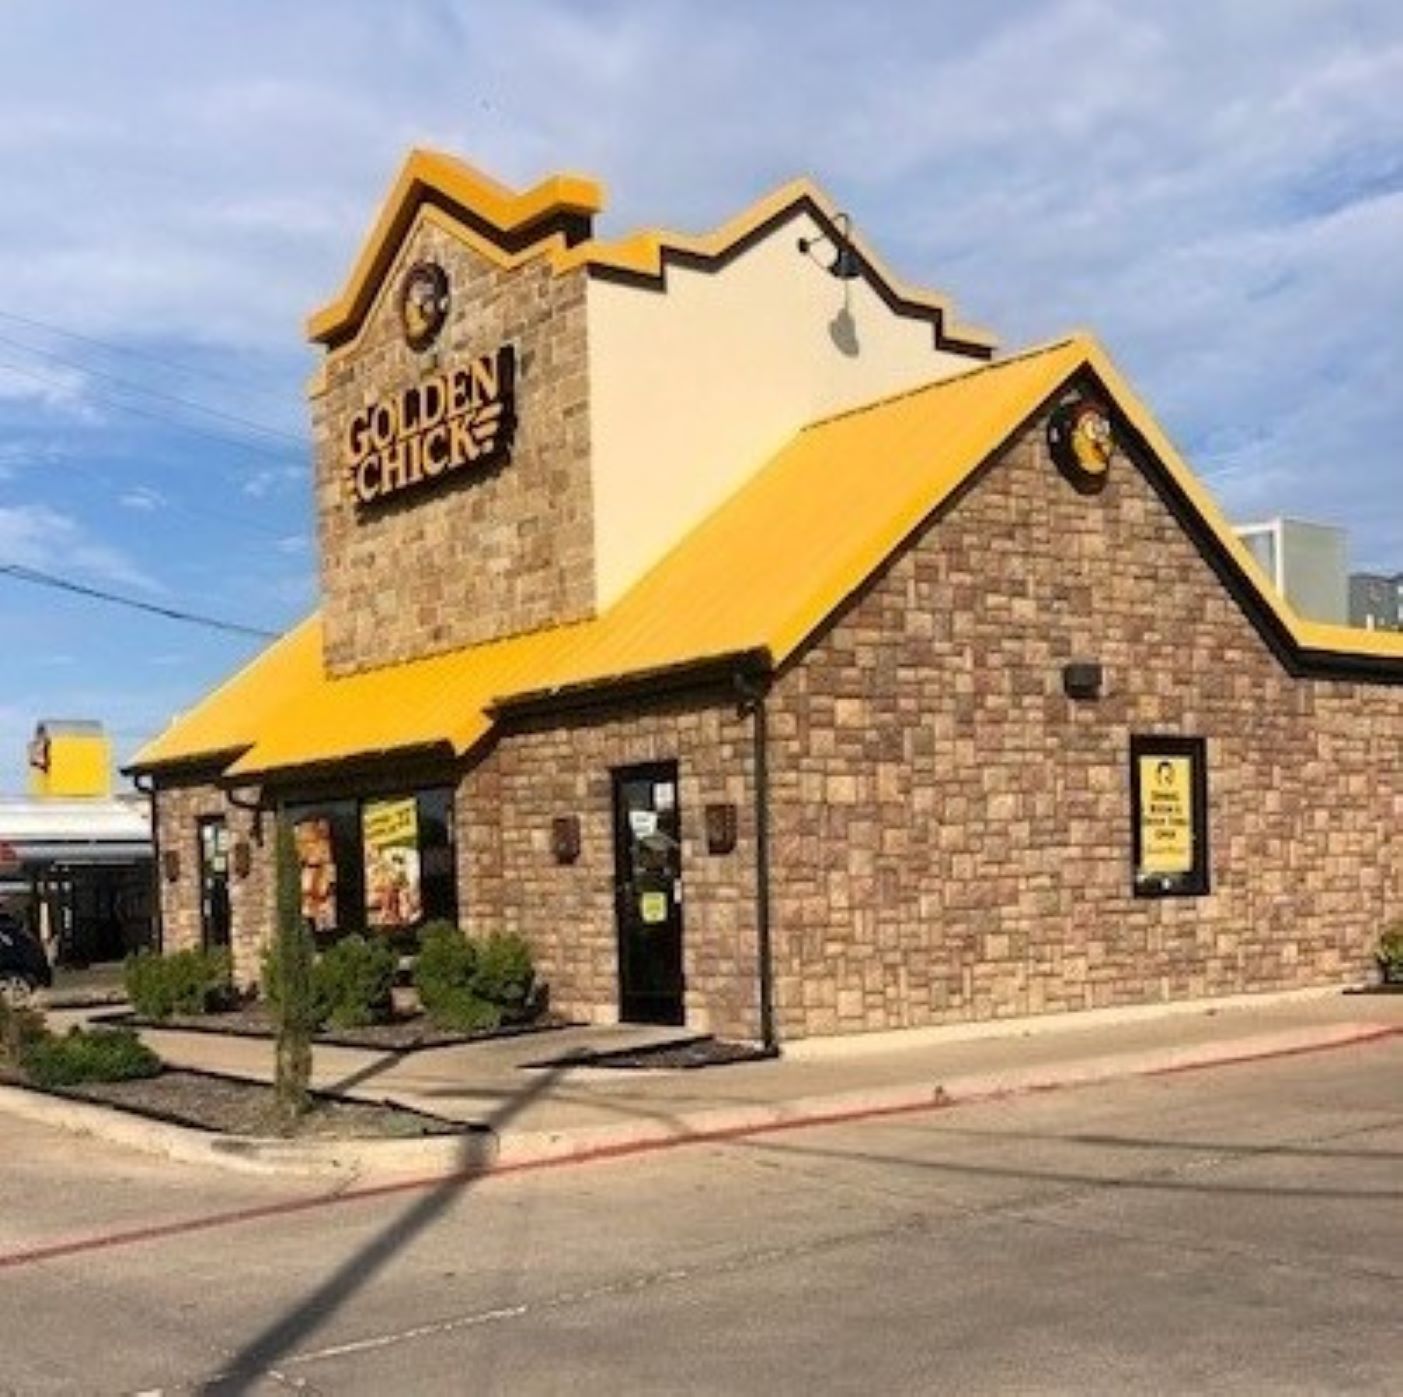 Golden Chick storefront.  Your local Golden Chick fast food restaurant in Stephenville, Texas